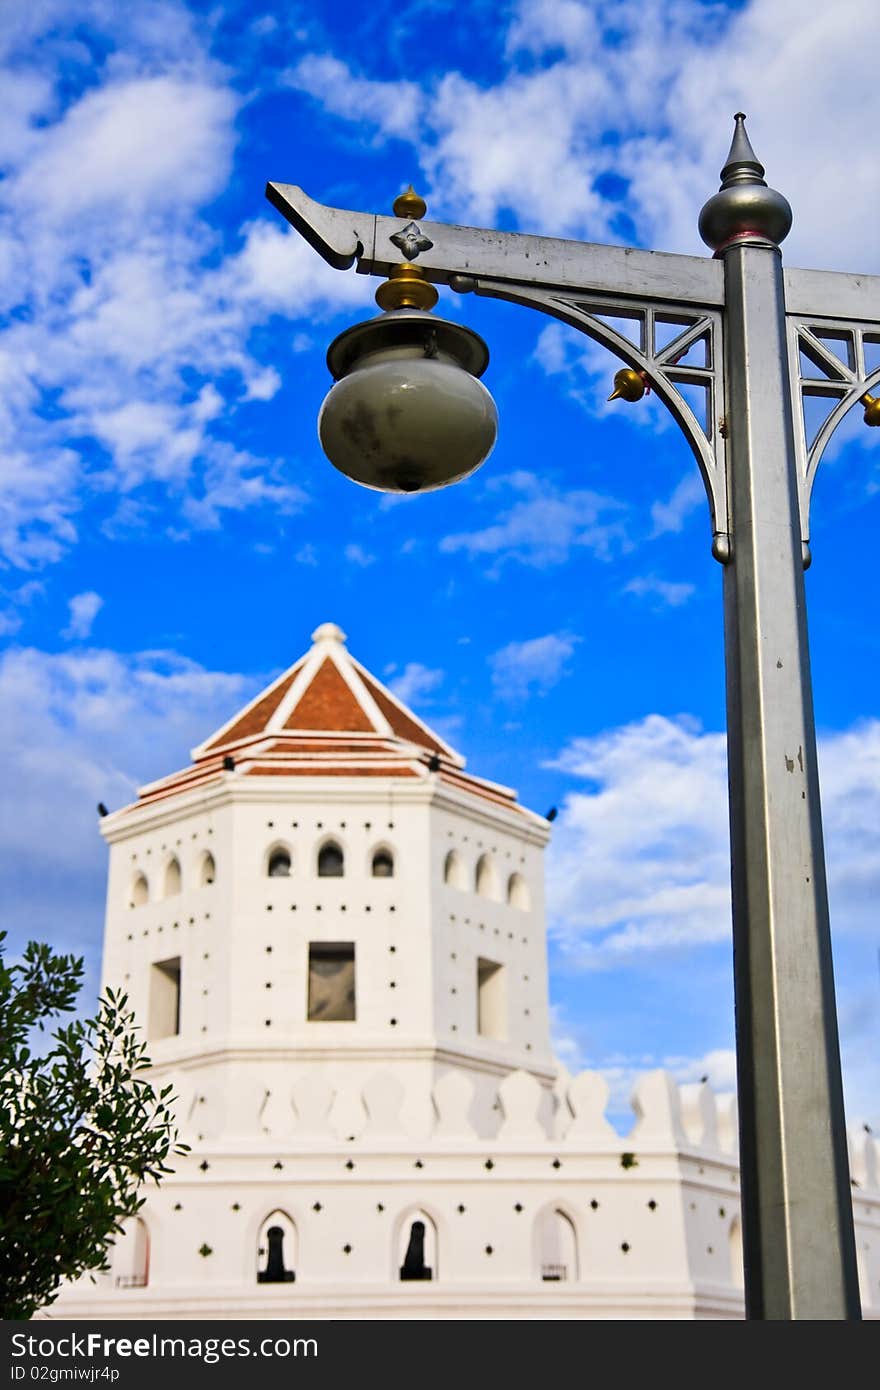 Old fortress and old lamp in Bangkok Thailand. Old fortress and old lamp in Bangkok Thailand.